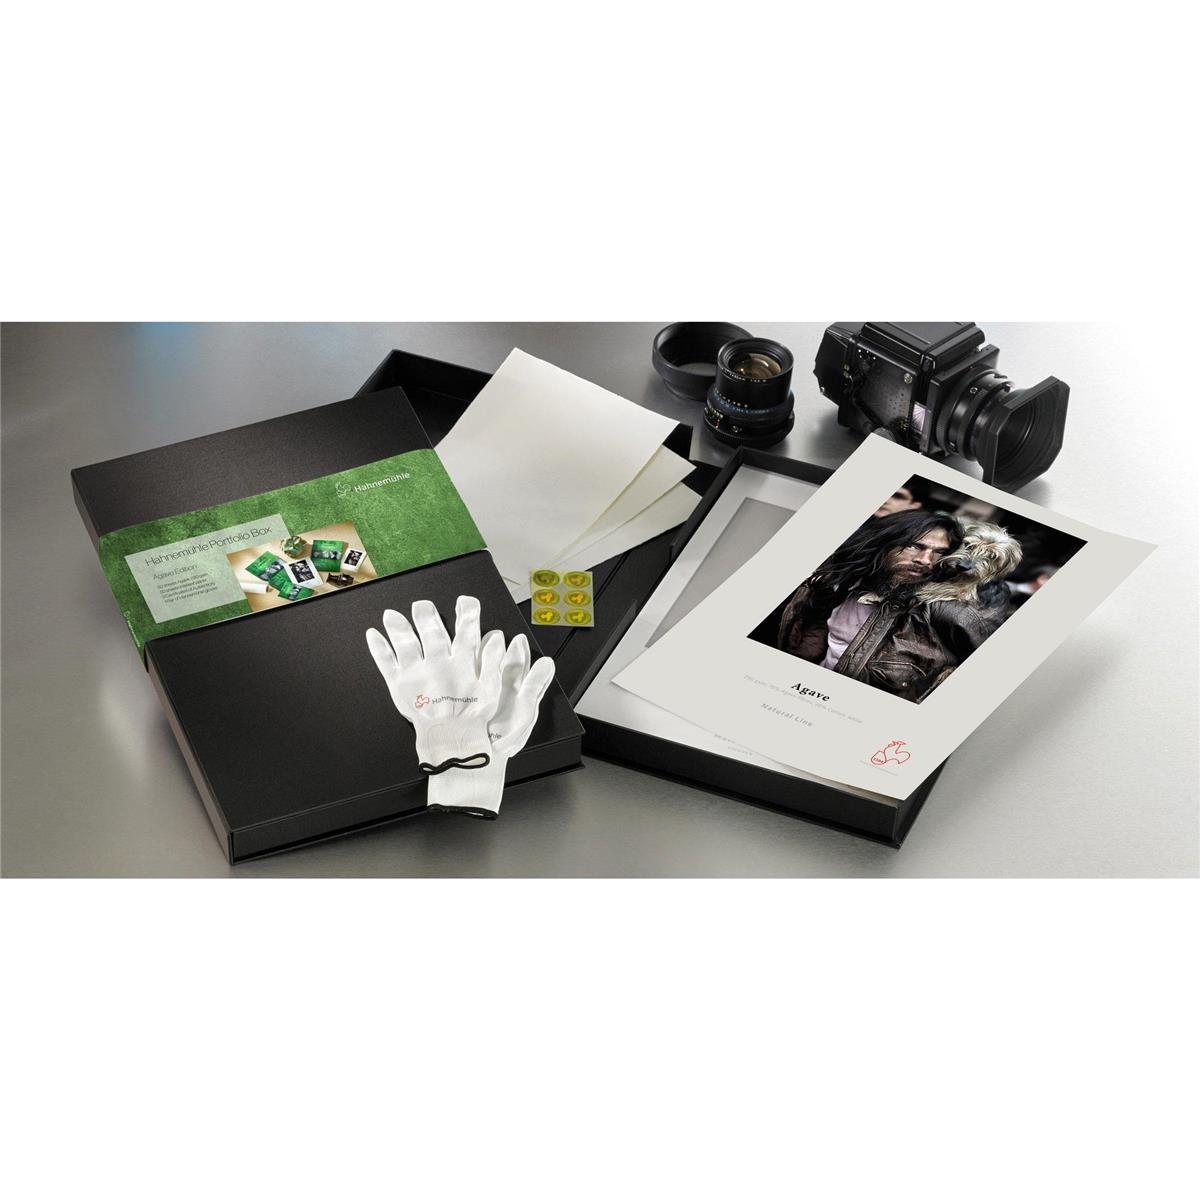 Image of Hahnemuhle FineArt Paper Portfolio Box with Photo Rag Agave Edition